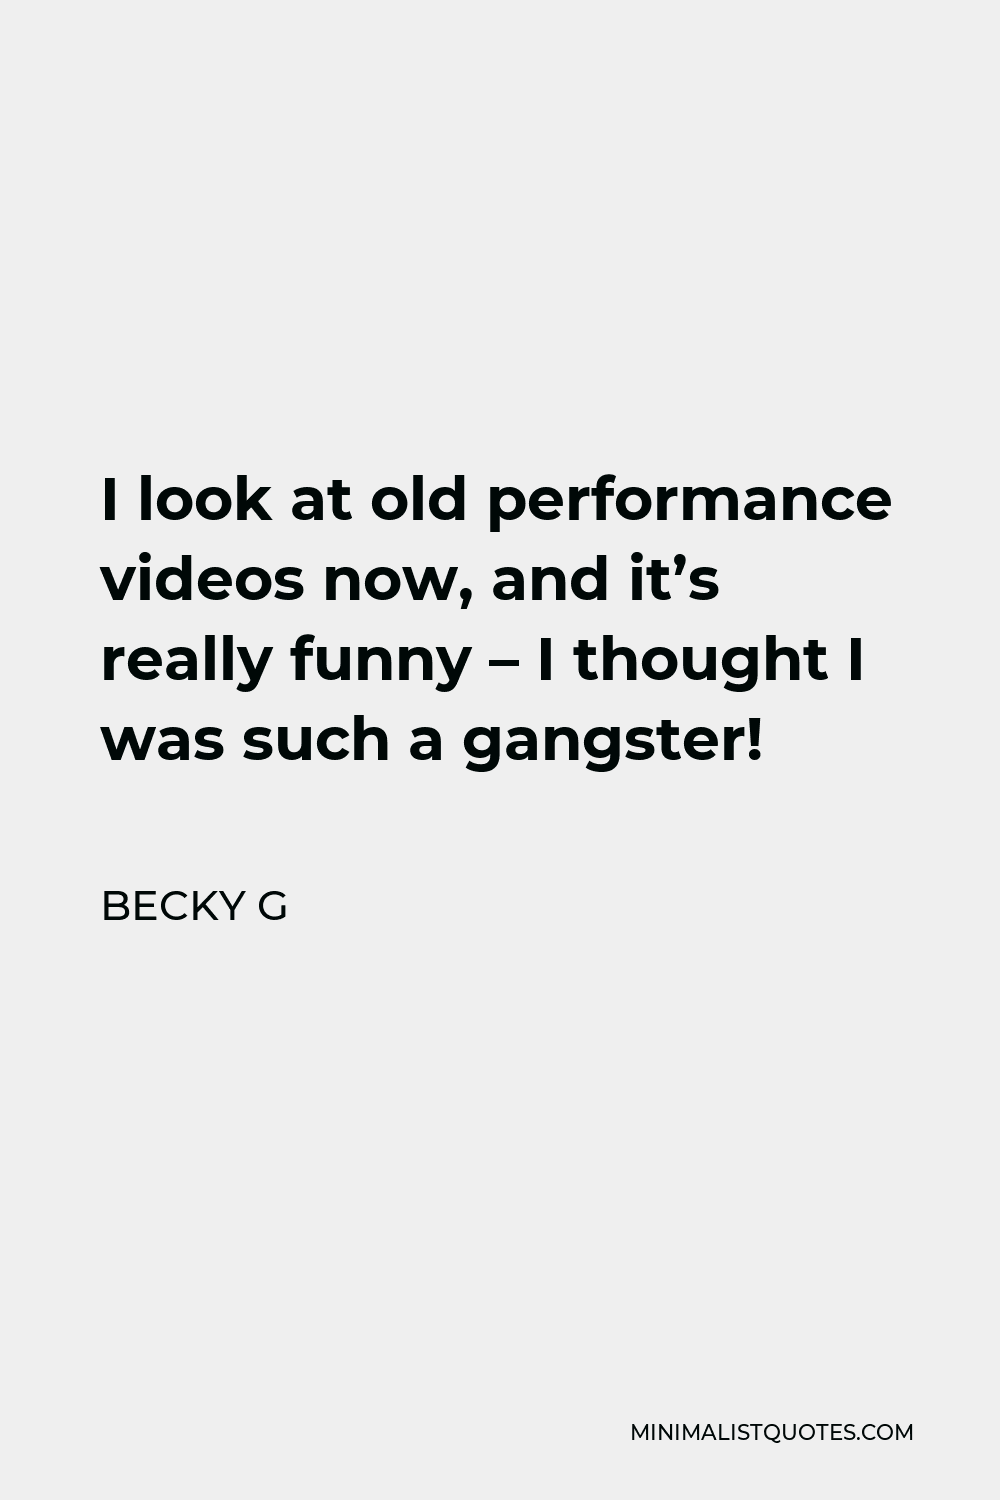 Becky G Quote: I look at old performance videos now, and it's really funny  - I thought I was such a gangster!